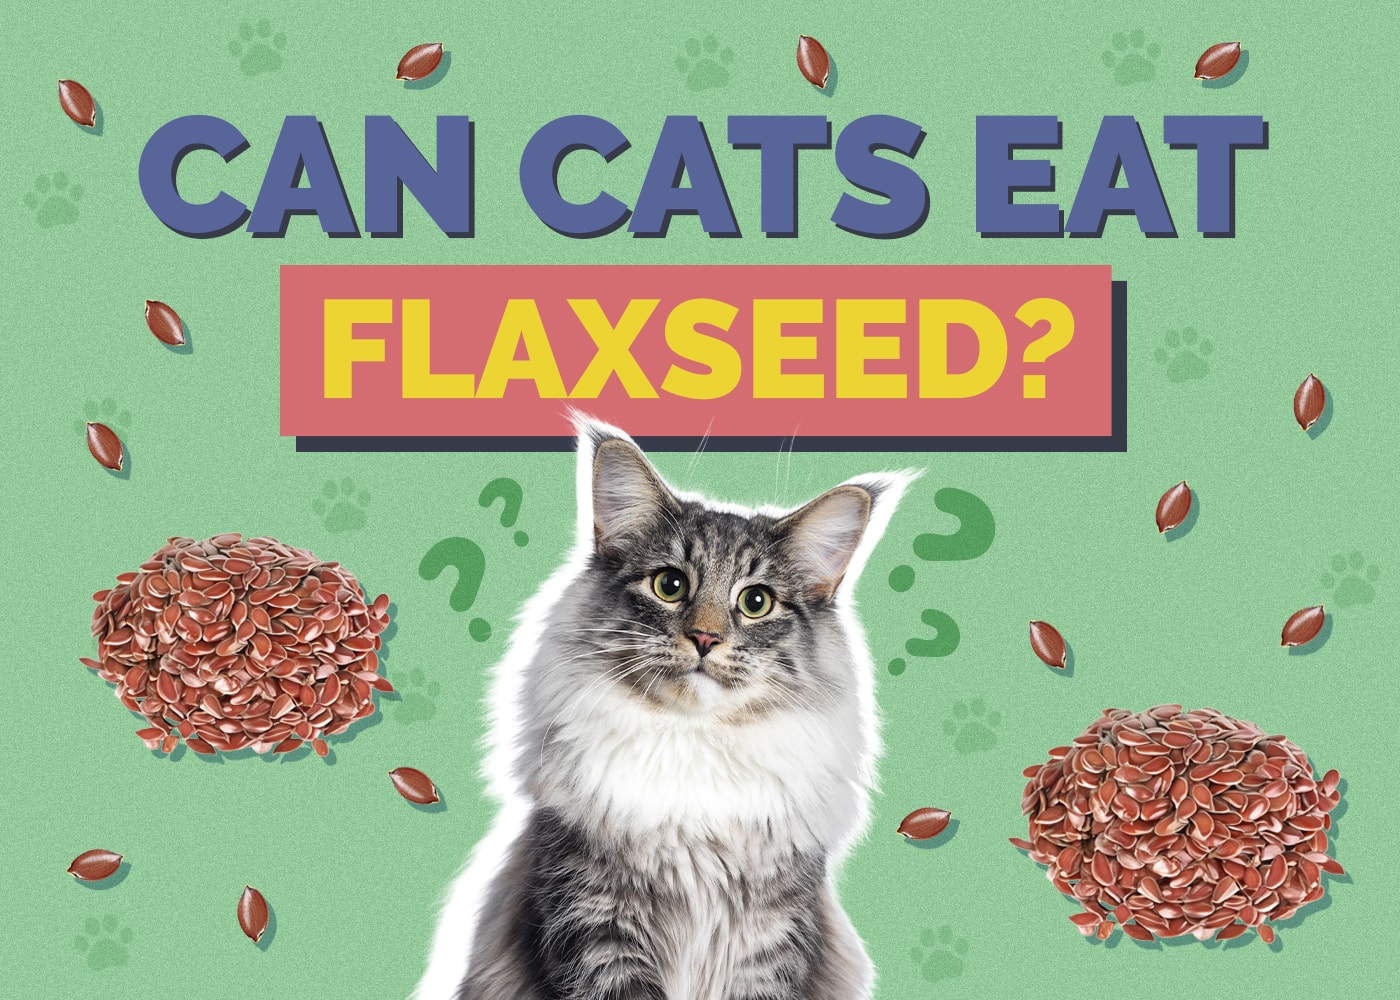 Can Cats Eat flaxseed